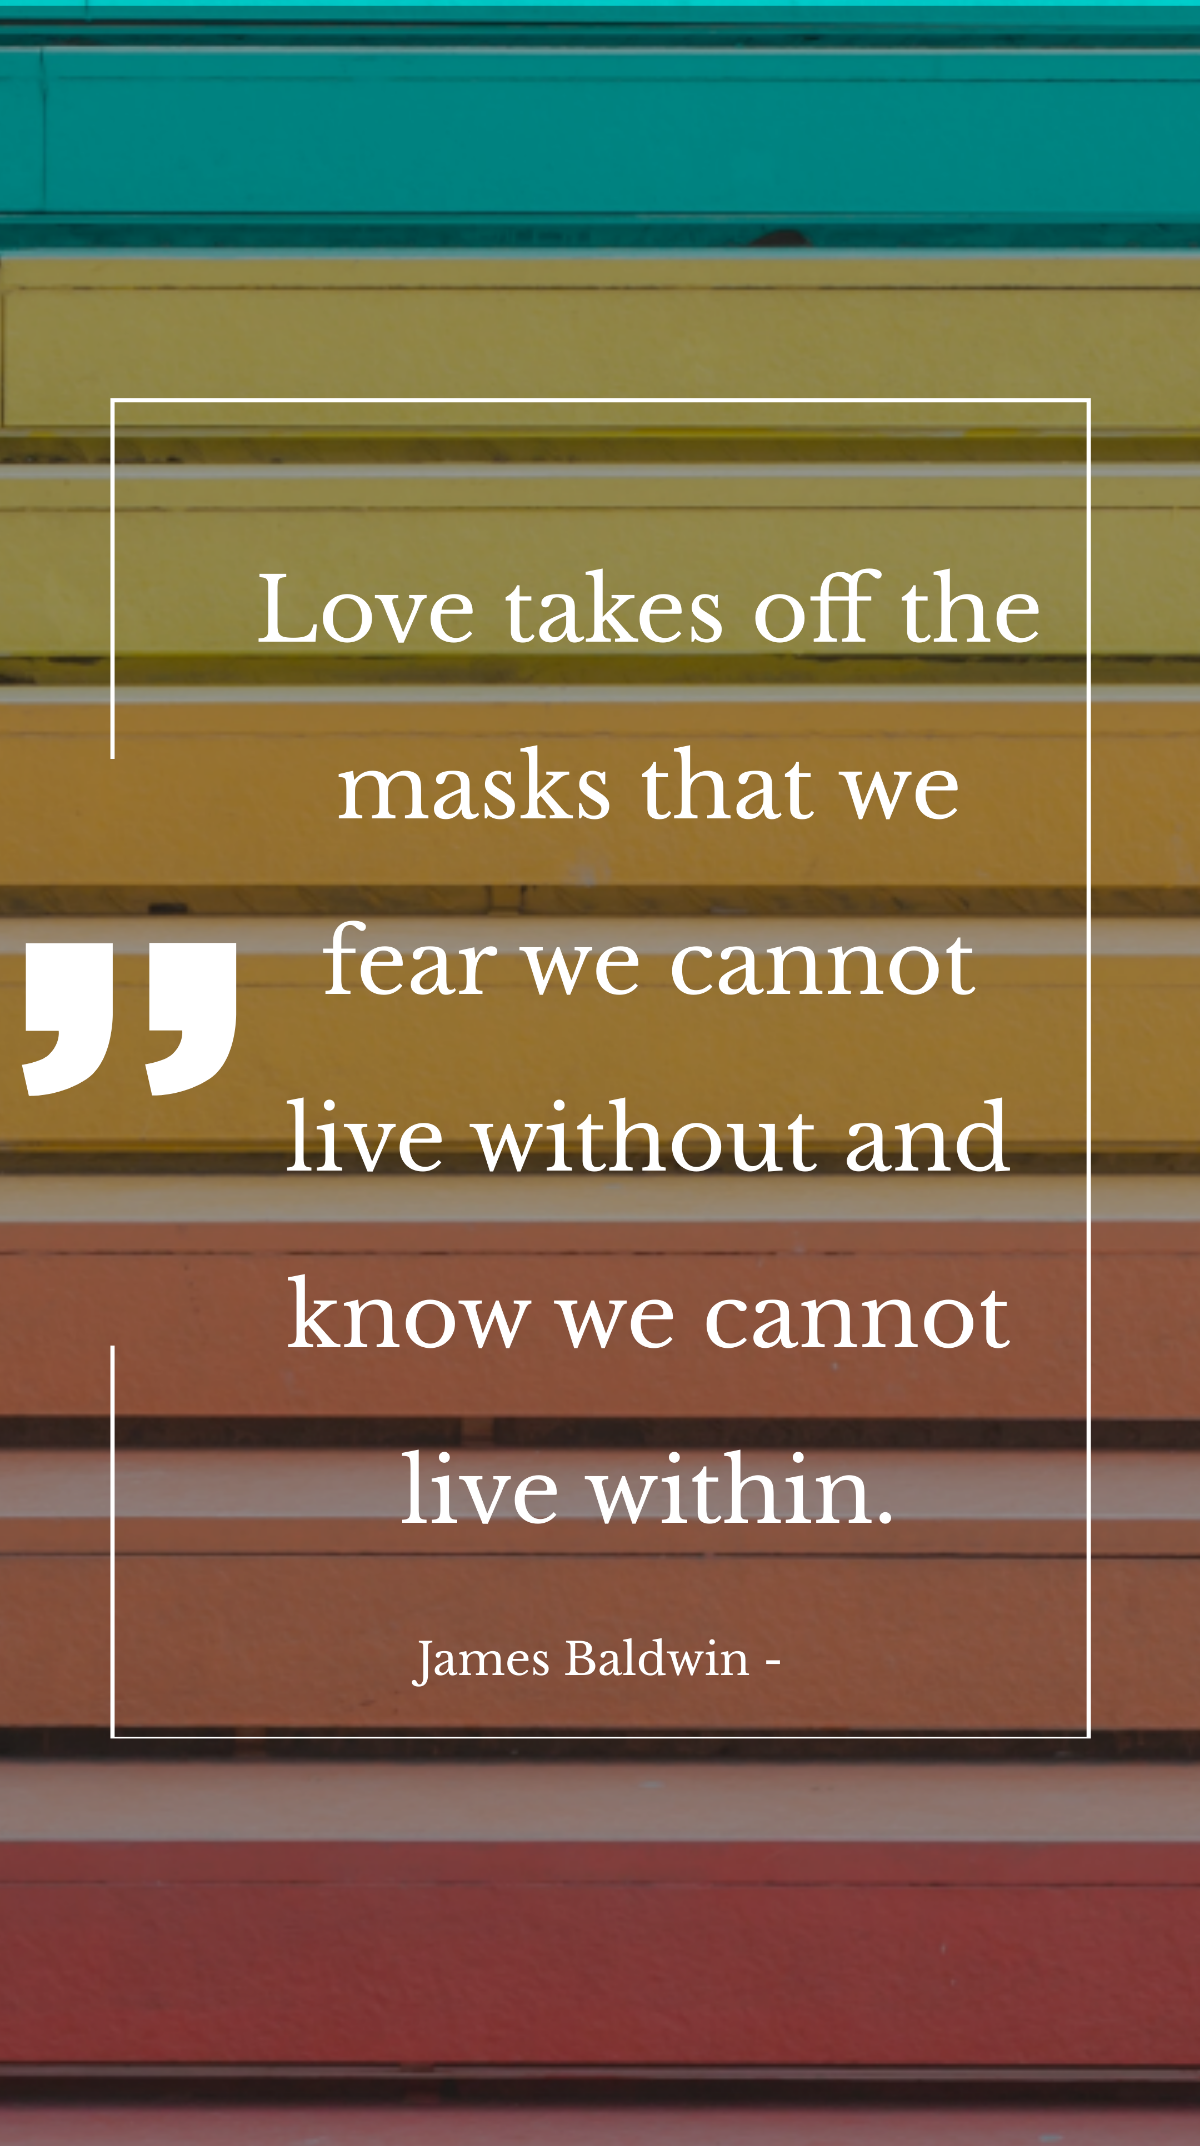 James Baldwin - Love takes off the masks that we fear we cannot live without and know we cannot live within. Template